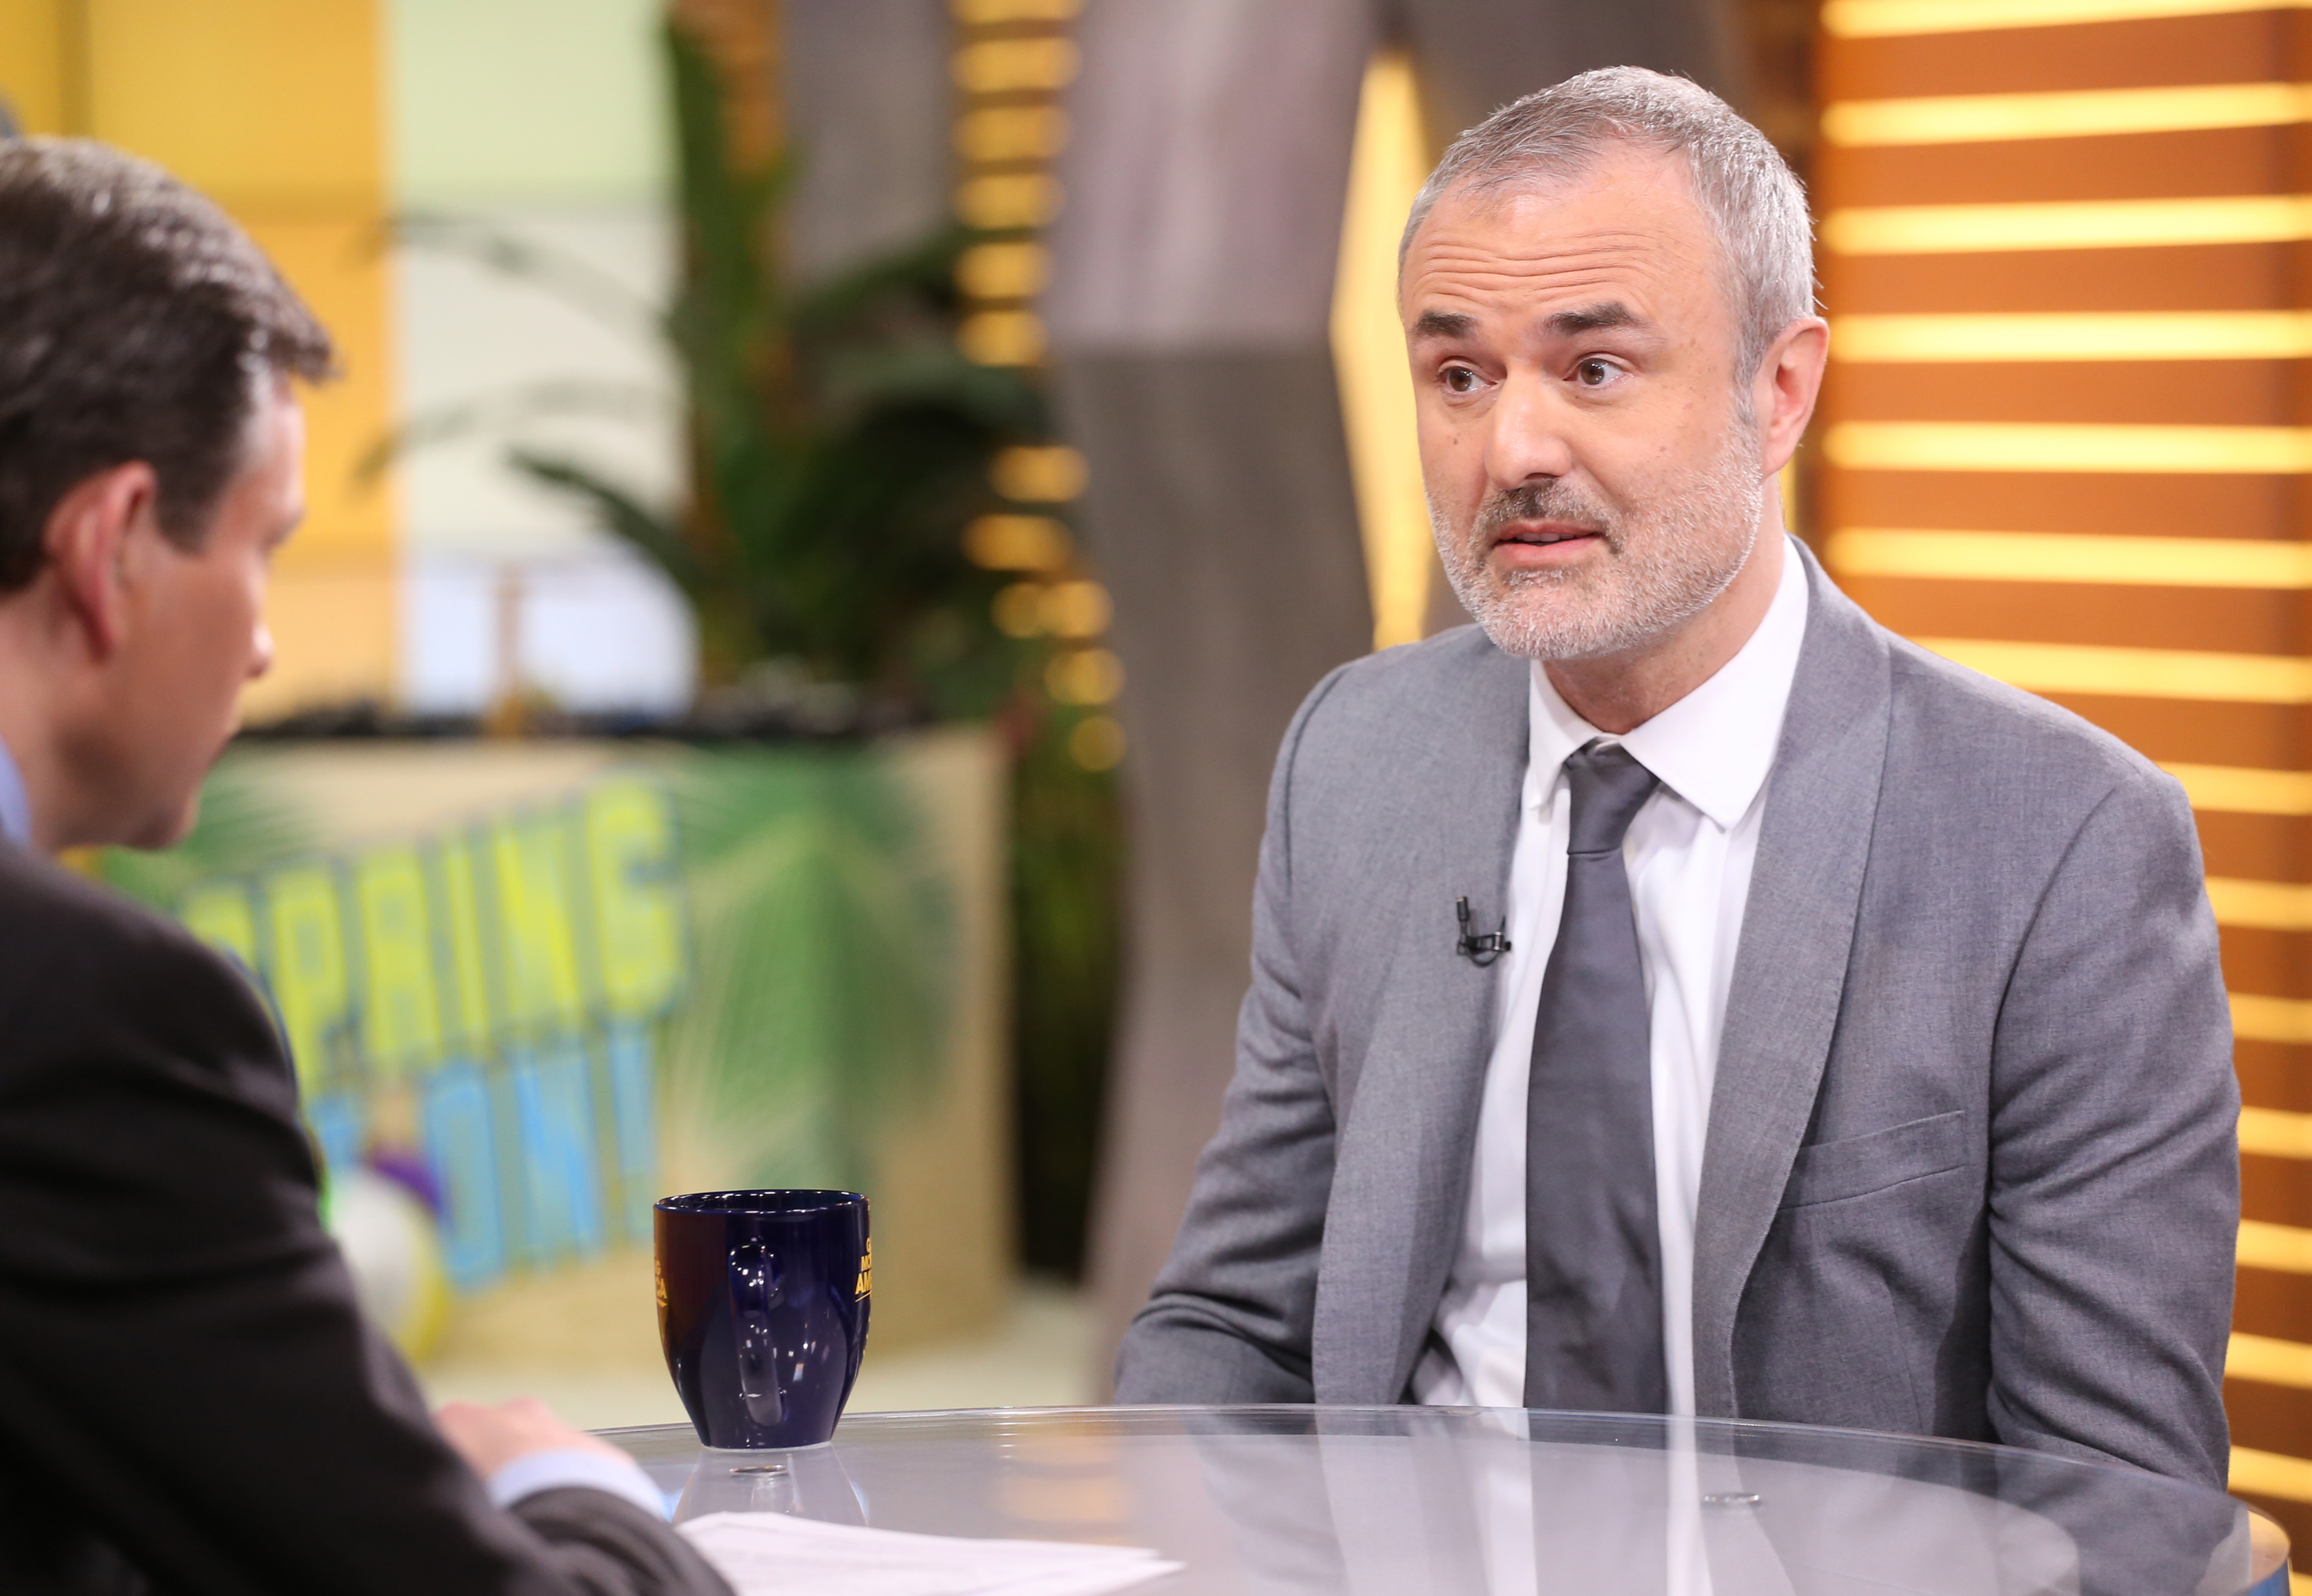 Nick Denton of Gawker is a guest on "Good Morning America" on March 24, 2016.